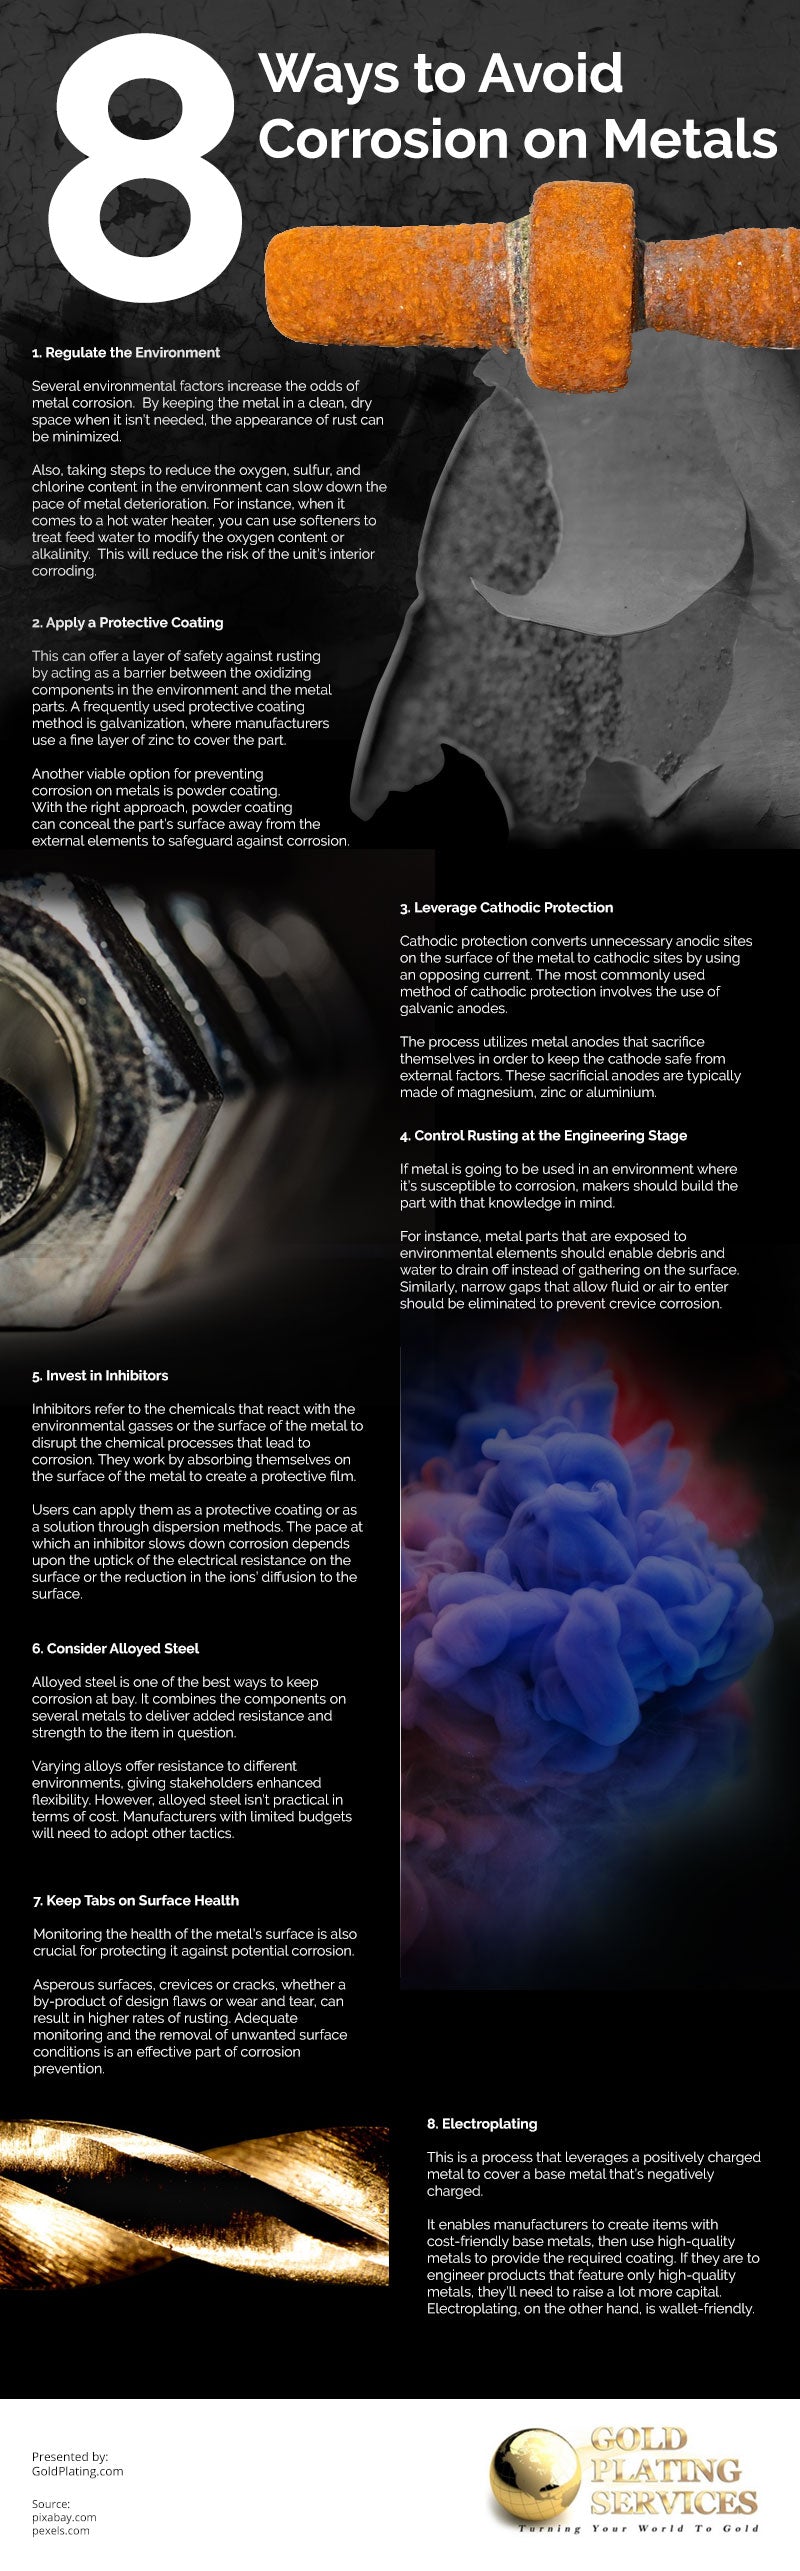 8 Ways to Avoid Corrosion on Metals [infographic]